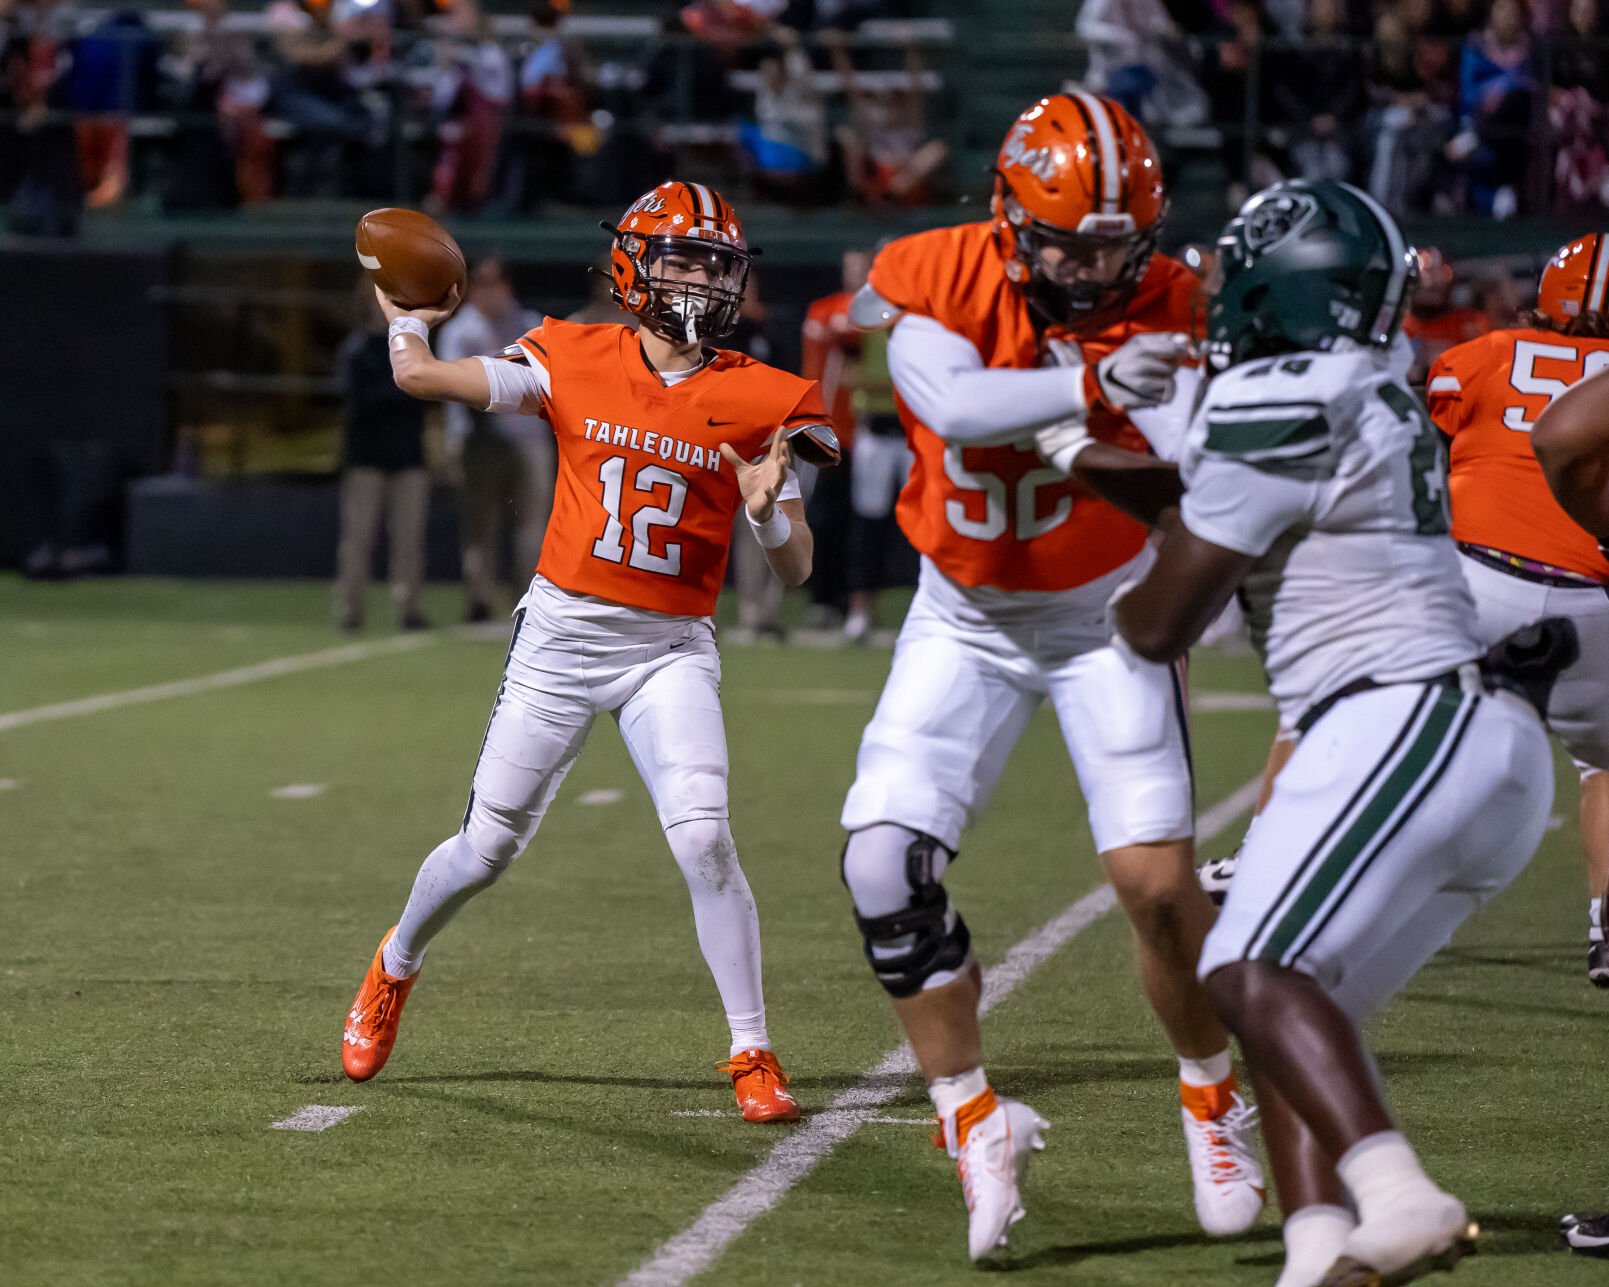 Tahlequah Football Looks to Rebound Against U.S. Grant after Tough Loss to Muskogee